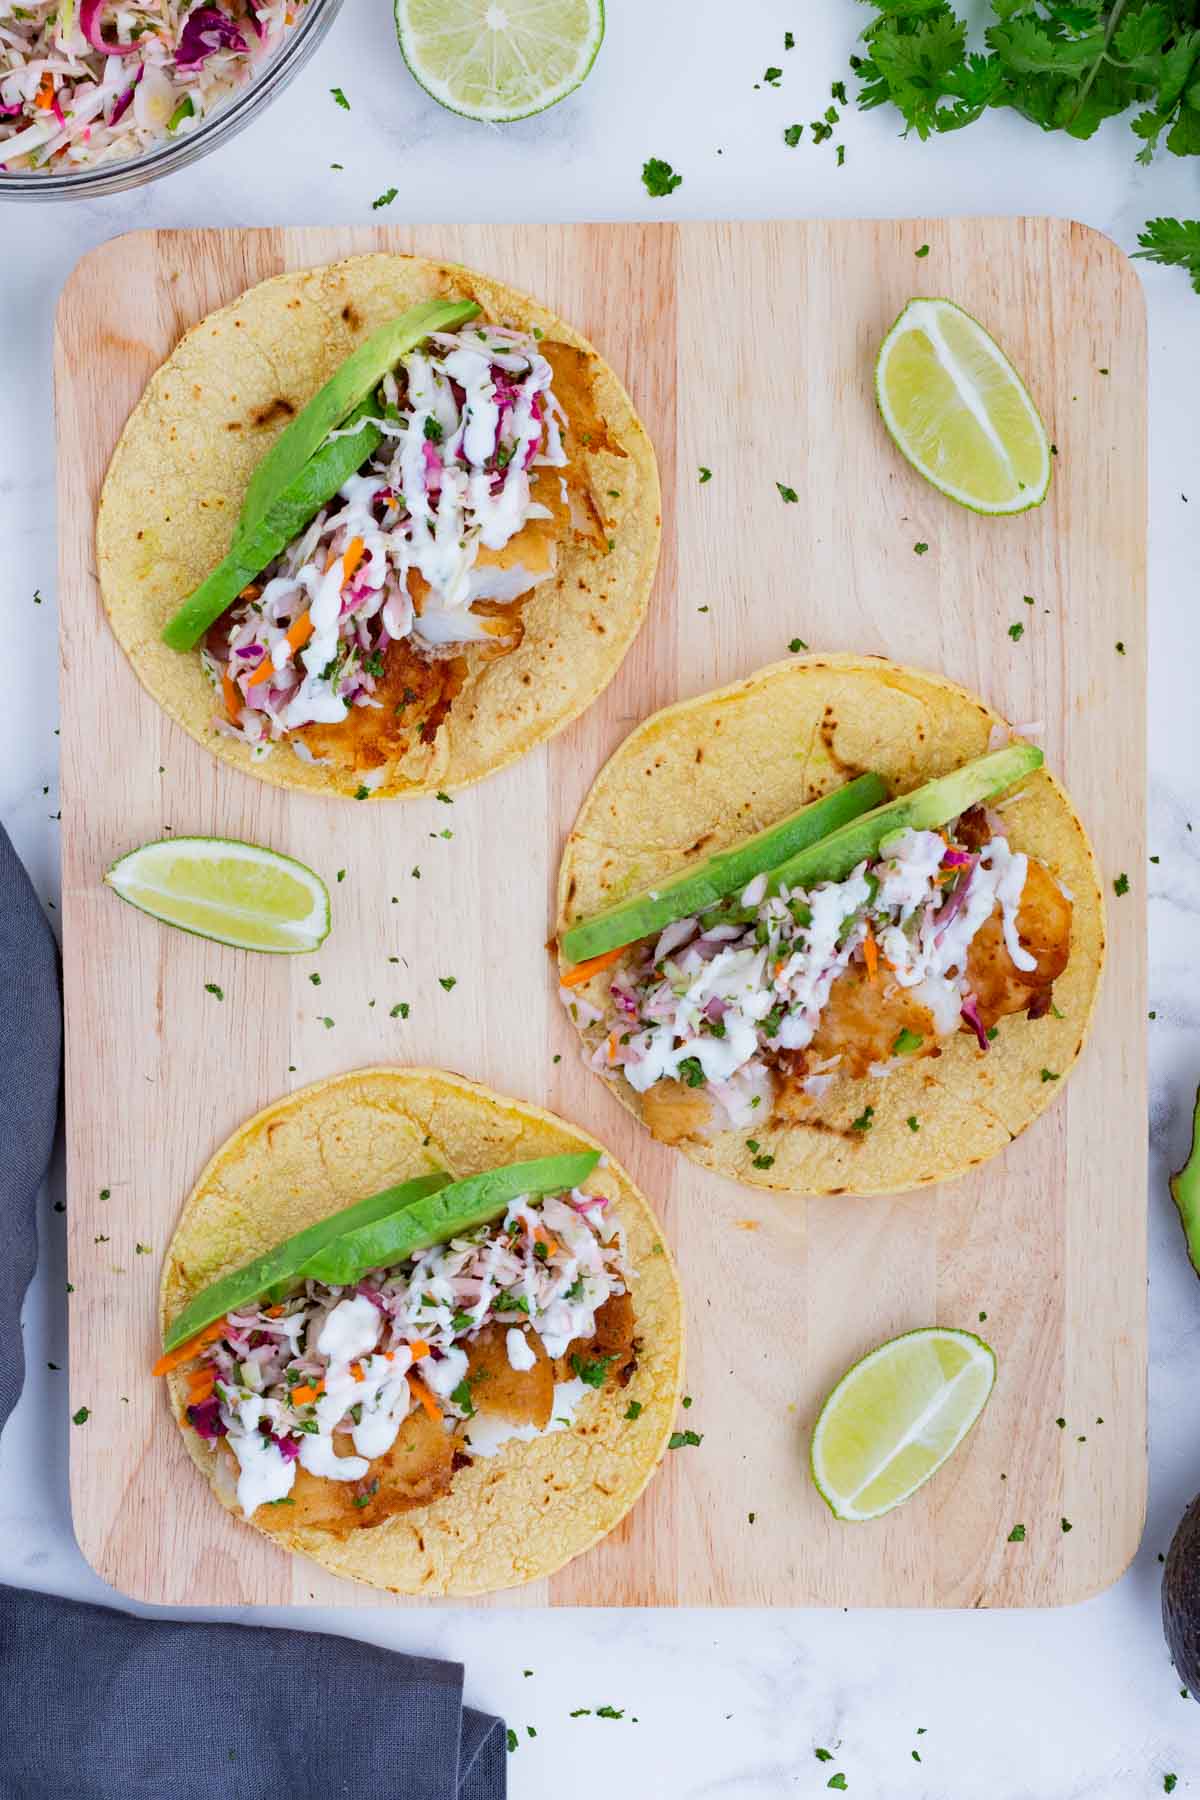 Baja Fish Tacos are an authentic and healthy recipe.